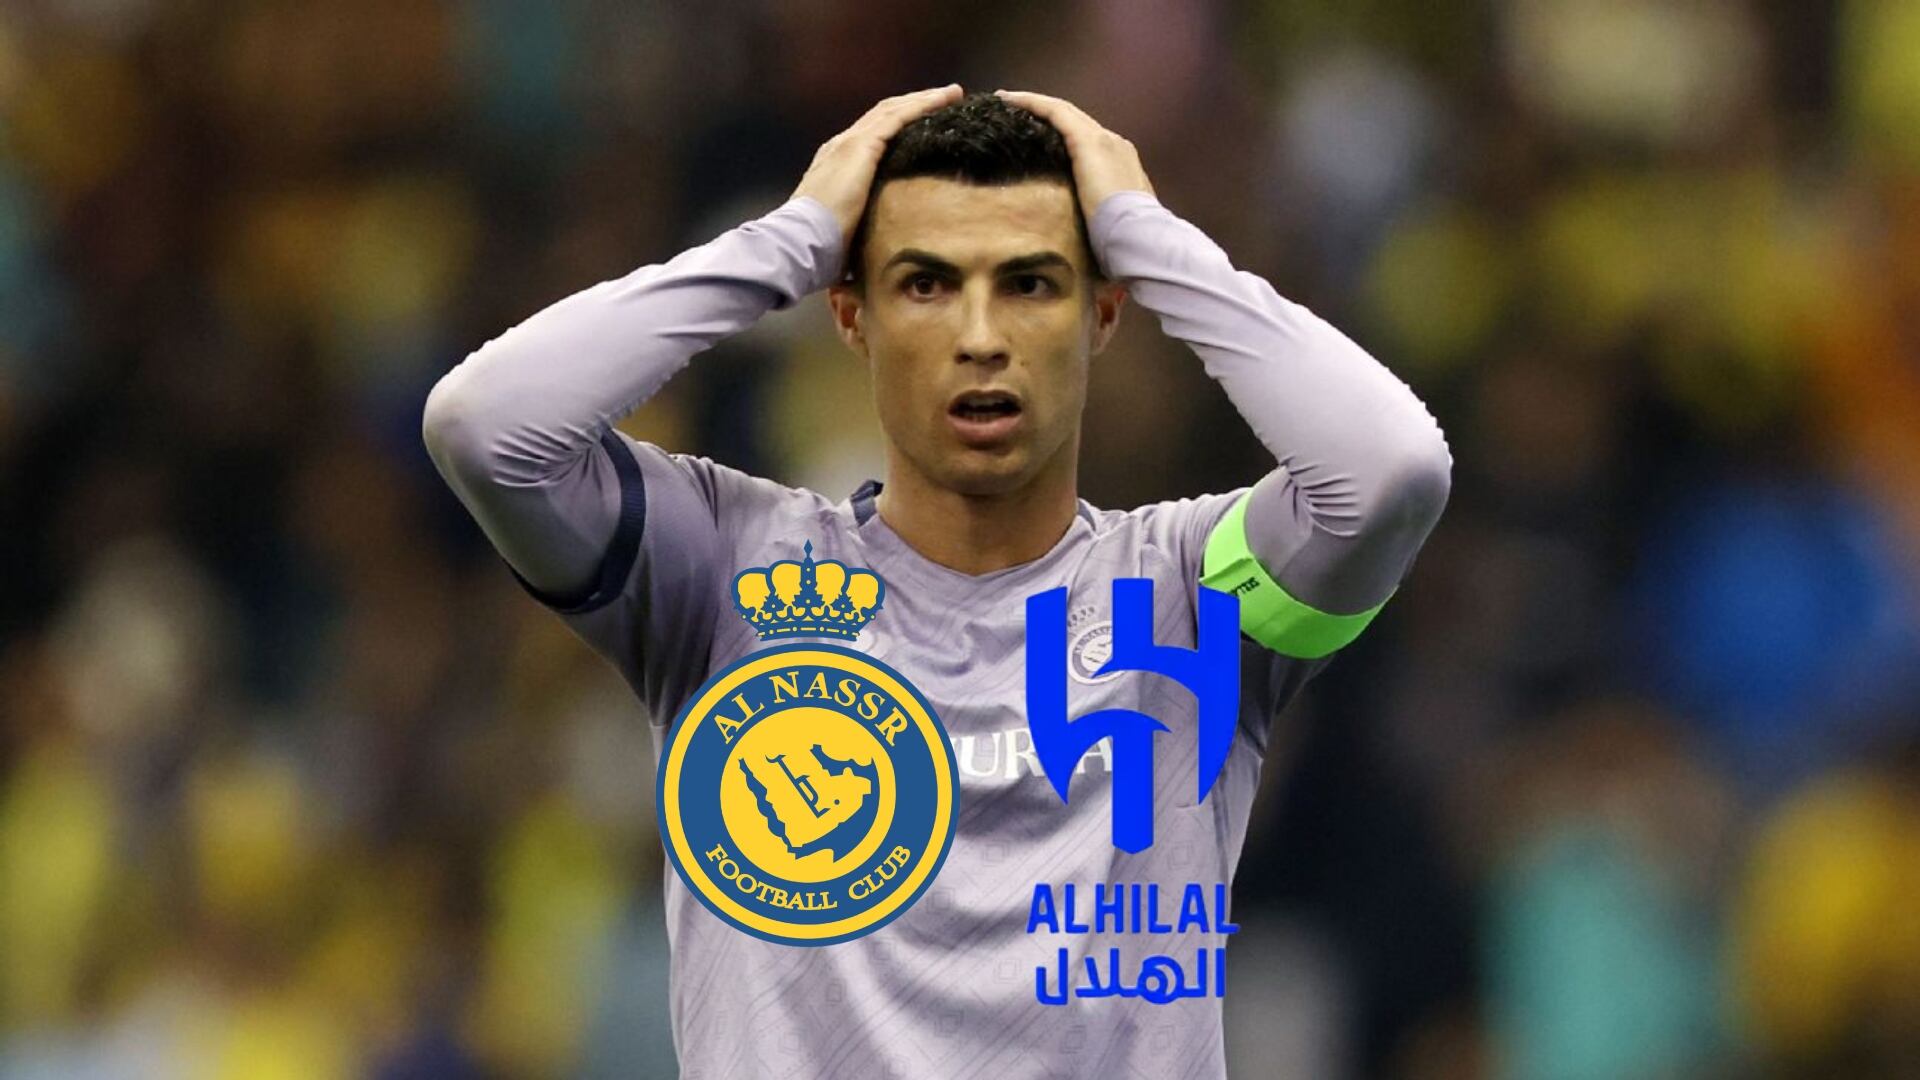 They want to anger Cristiano more, the gesture of Al Hilal that could accelerate CR7's exit from Arabia